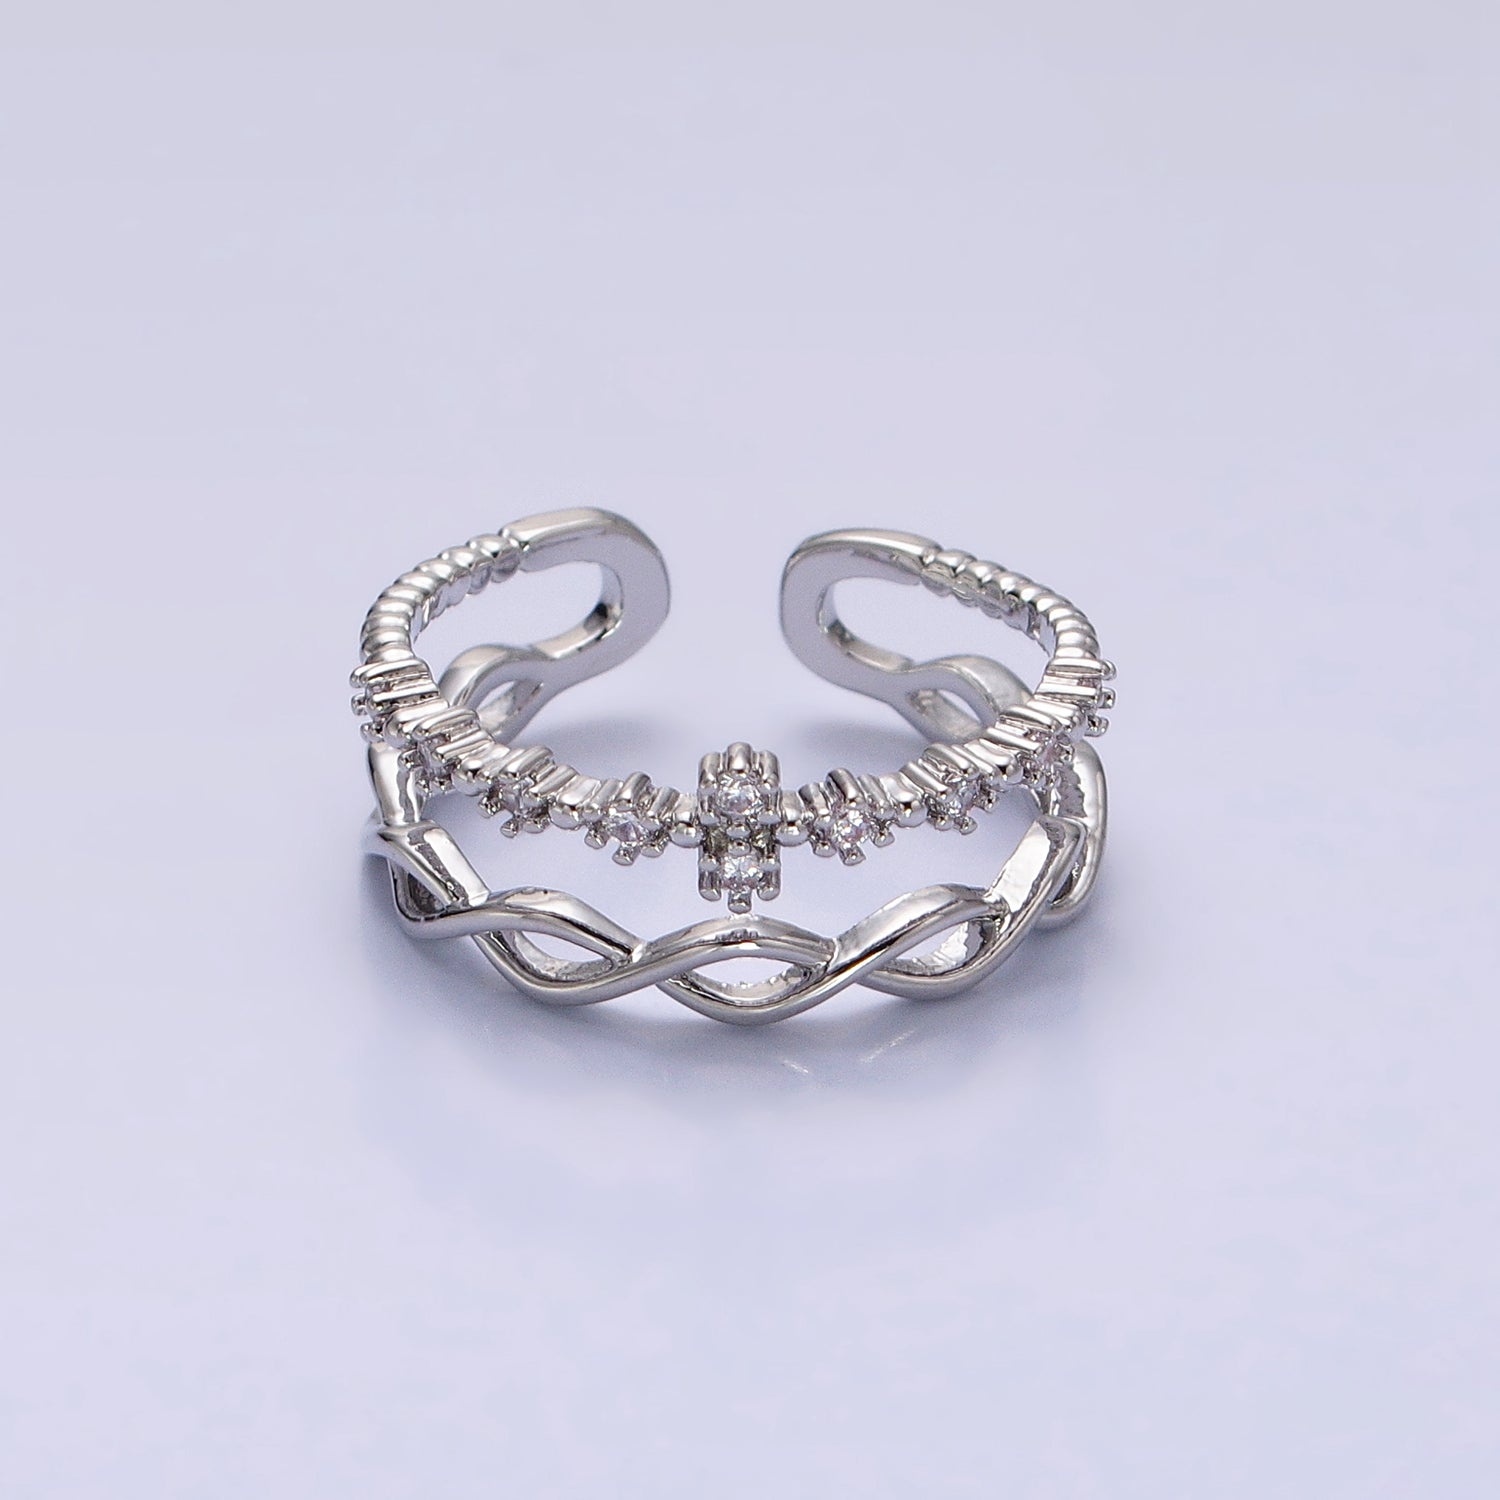 Double Band Ring Gold Twist Knot Band Open Adjustable Ring AA1262 AA1263